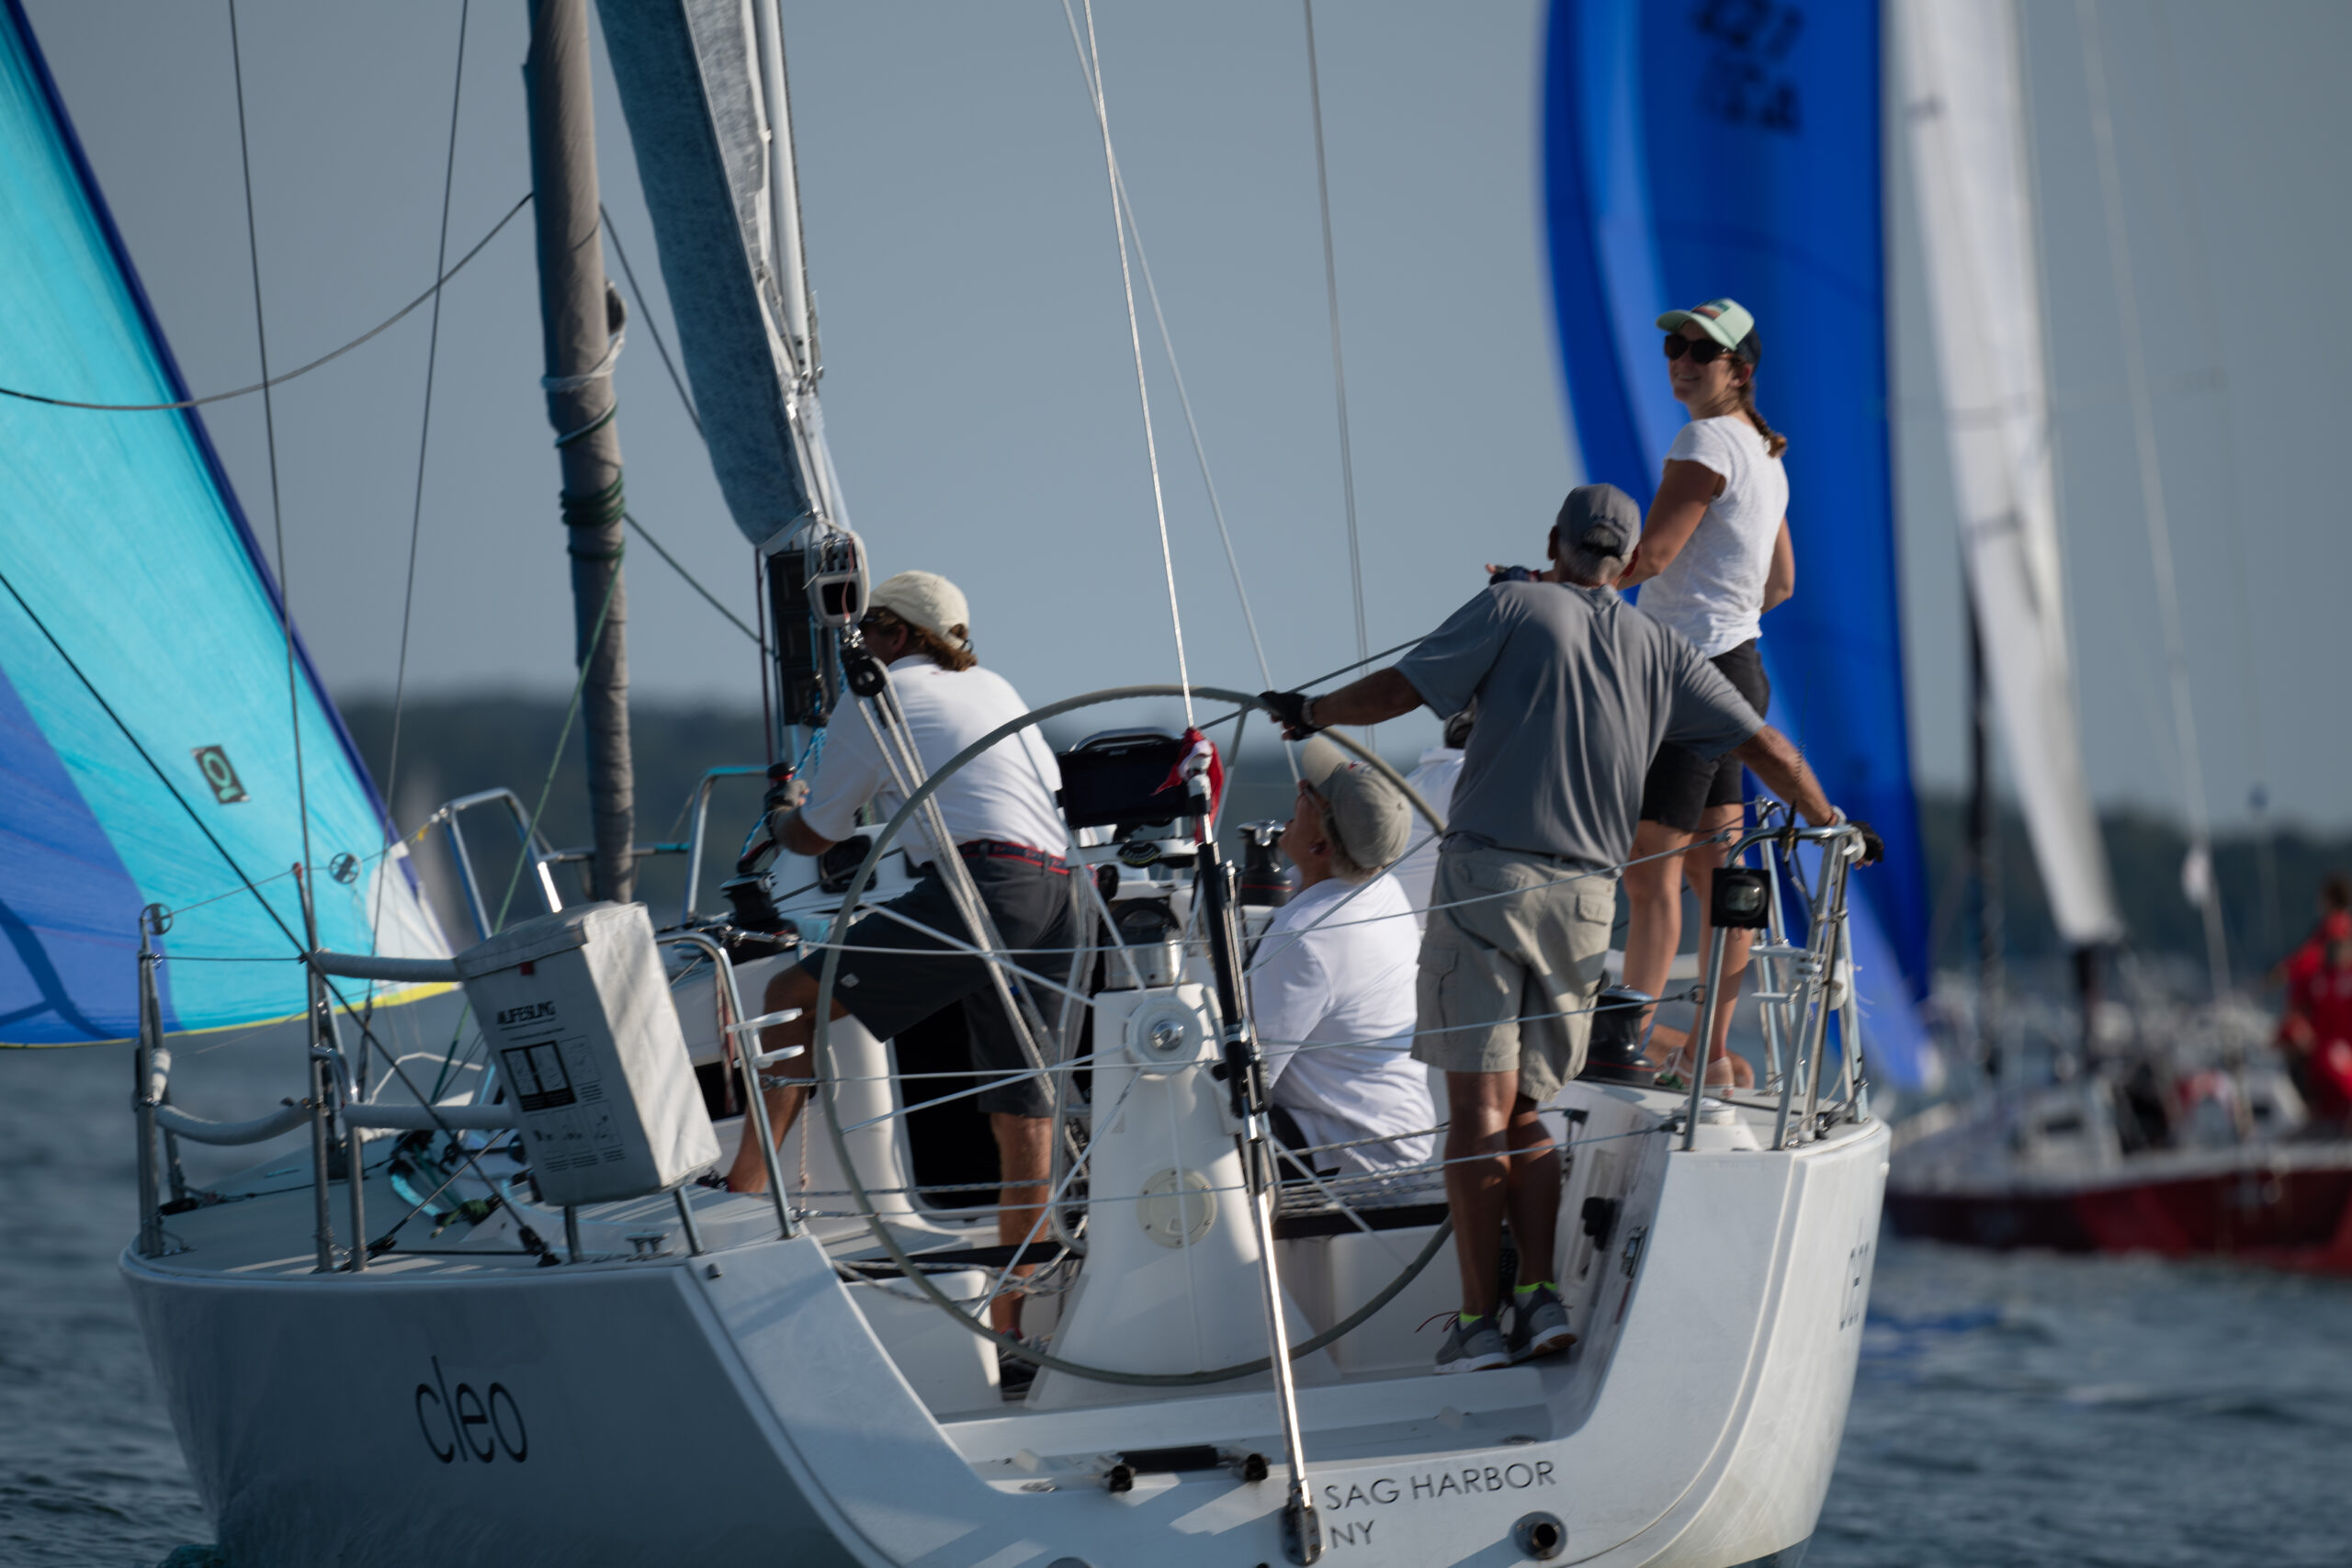 Cleo, skippered by Ray Pepi, competed in Division I on Saturday.     GARY SENFT/EASTENDMARINEPHOTOGRAPHY.COM